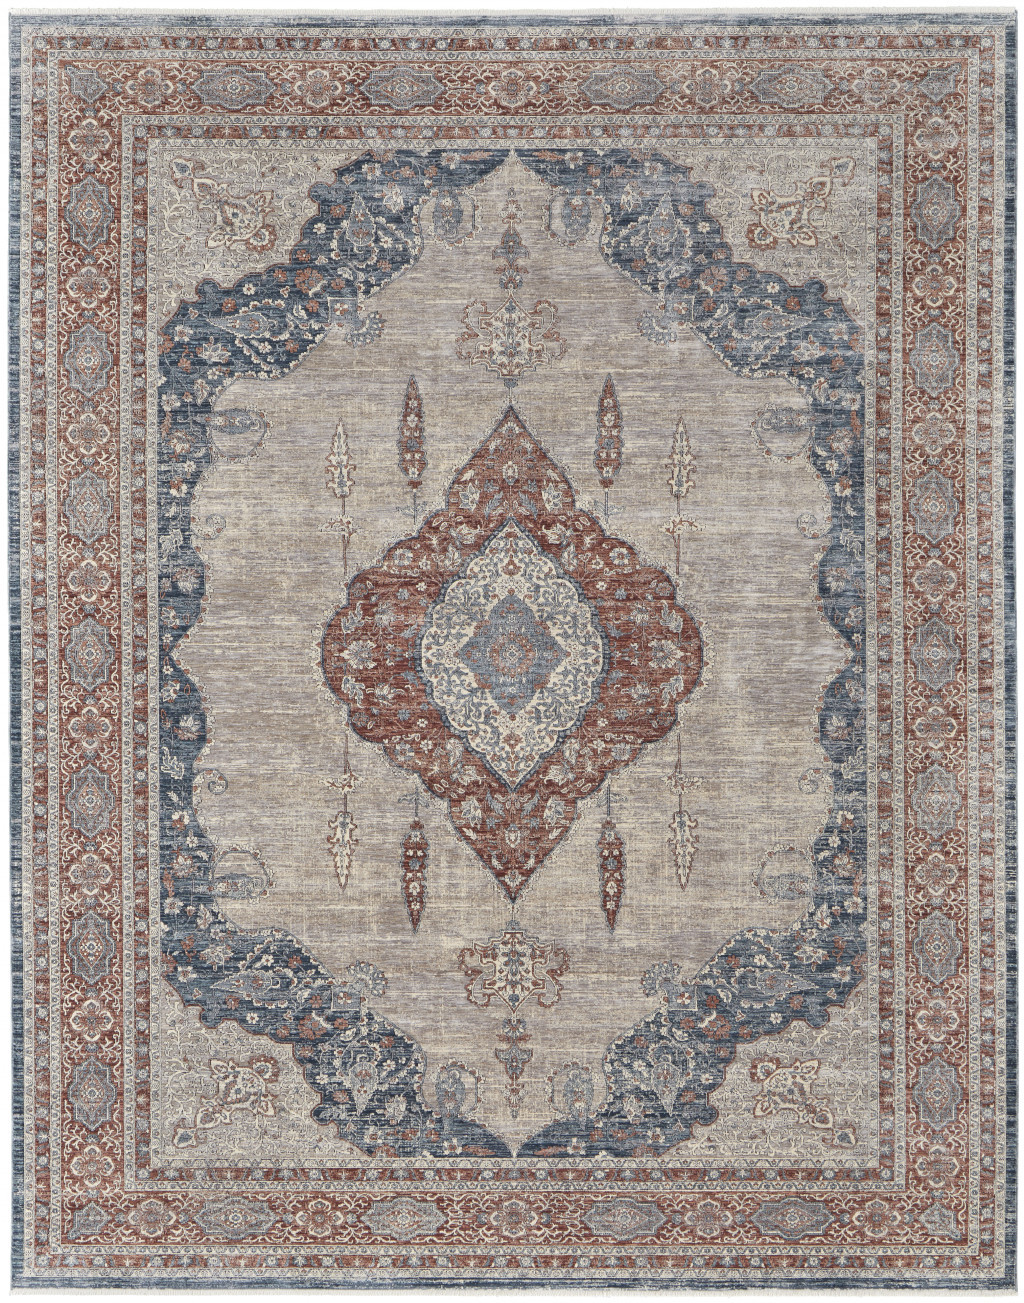 4' X 6' Gray Red And Blue Floral Power Loom Stain Resistant Area Rug-515044-1